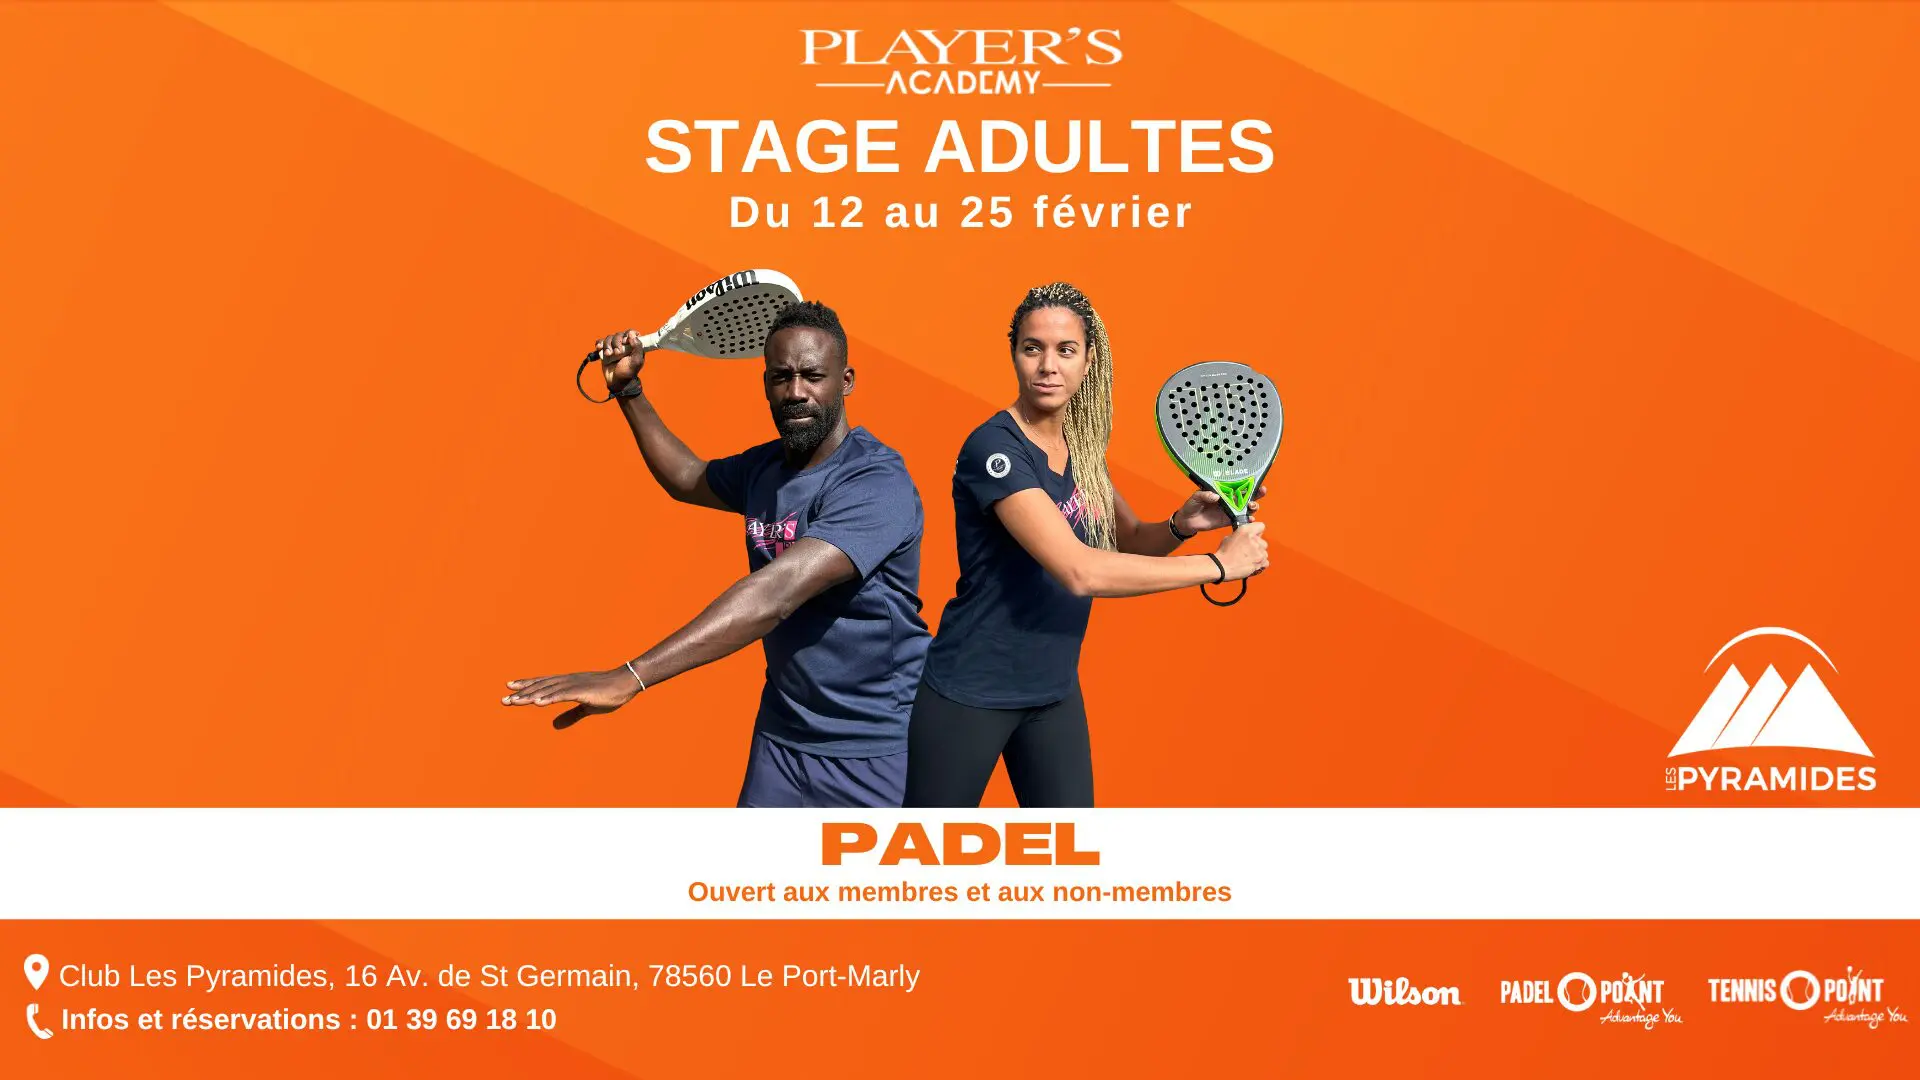 stages padel adultes players acacdemy